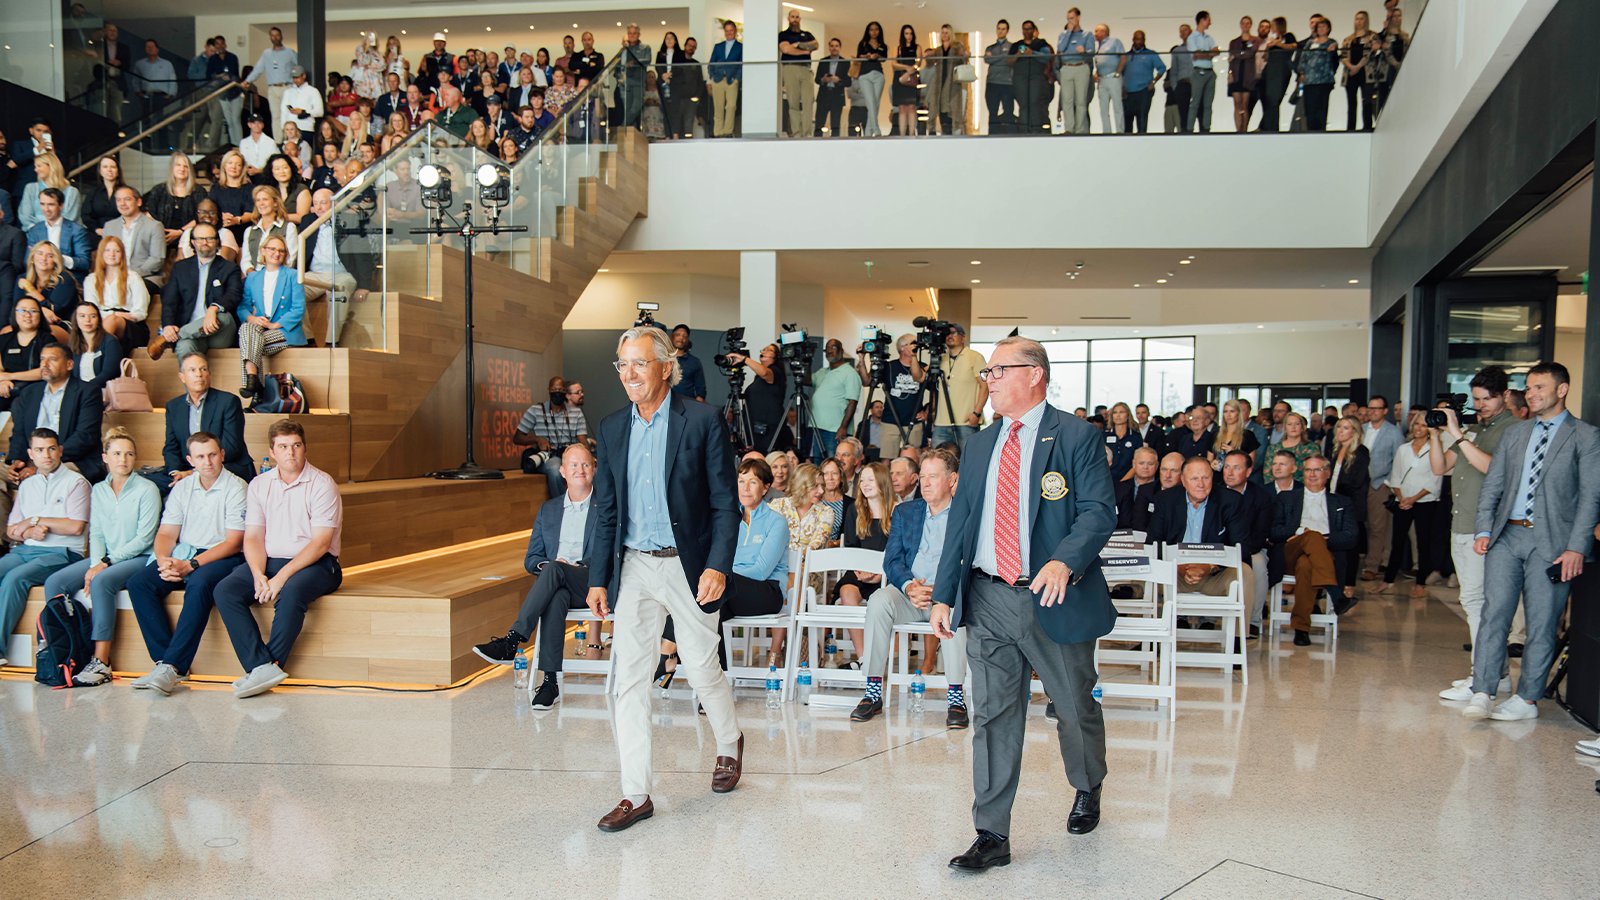 PGA of America CEO, Seth Waugh and PGA of America President, Jim Richerson during the Welcome Home Celebration at PGA Frisco Campus on August 22, 2022 in Frisco, Texas. (Photo by Daryl Johnson/PGA of America)